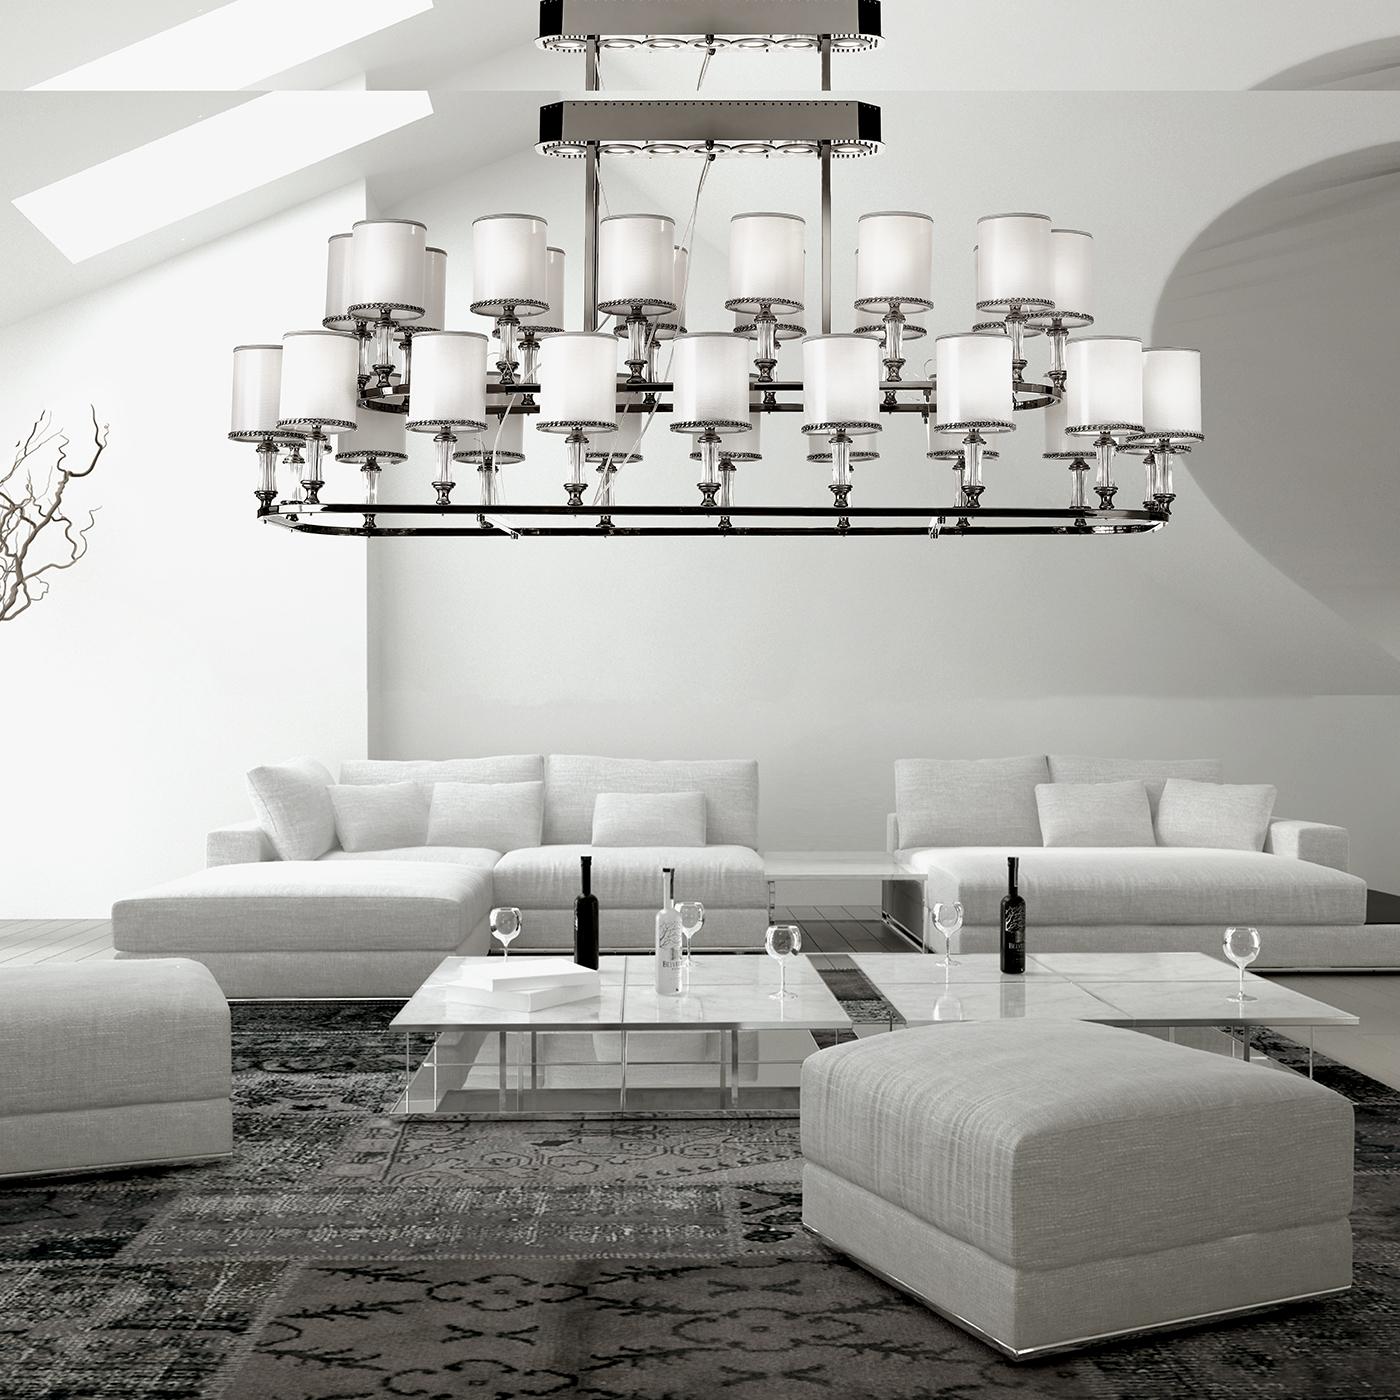 Thanks to its stately size and sophisticated silhouette, this magnificent chandelier will enrich a large entryway or highlight a dining table. The lightweight metal structure with beveled corners is handcrafted and has a black nickel finish that